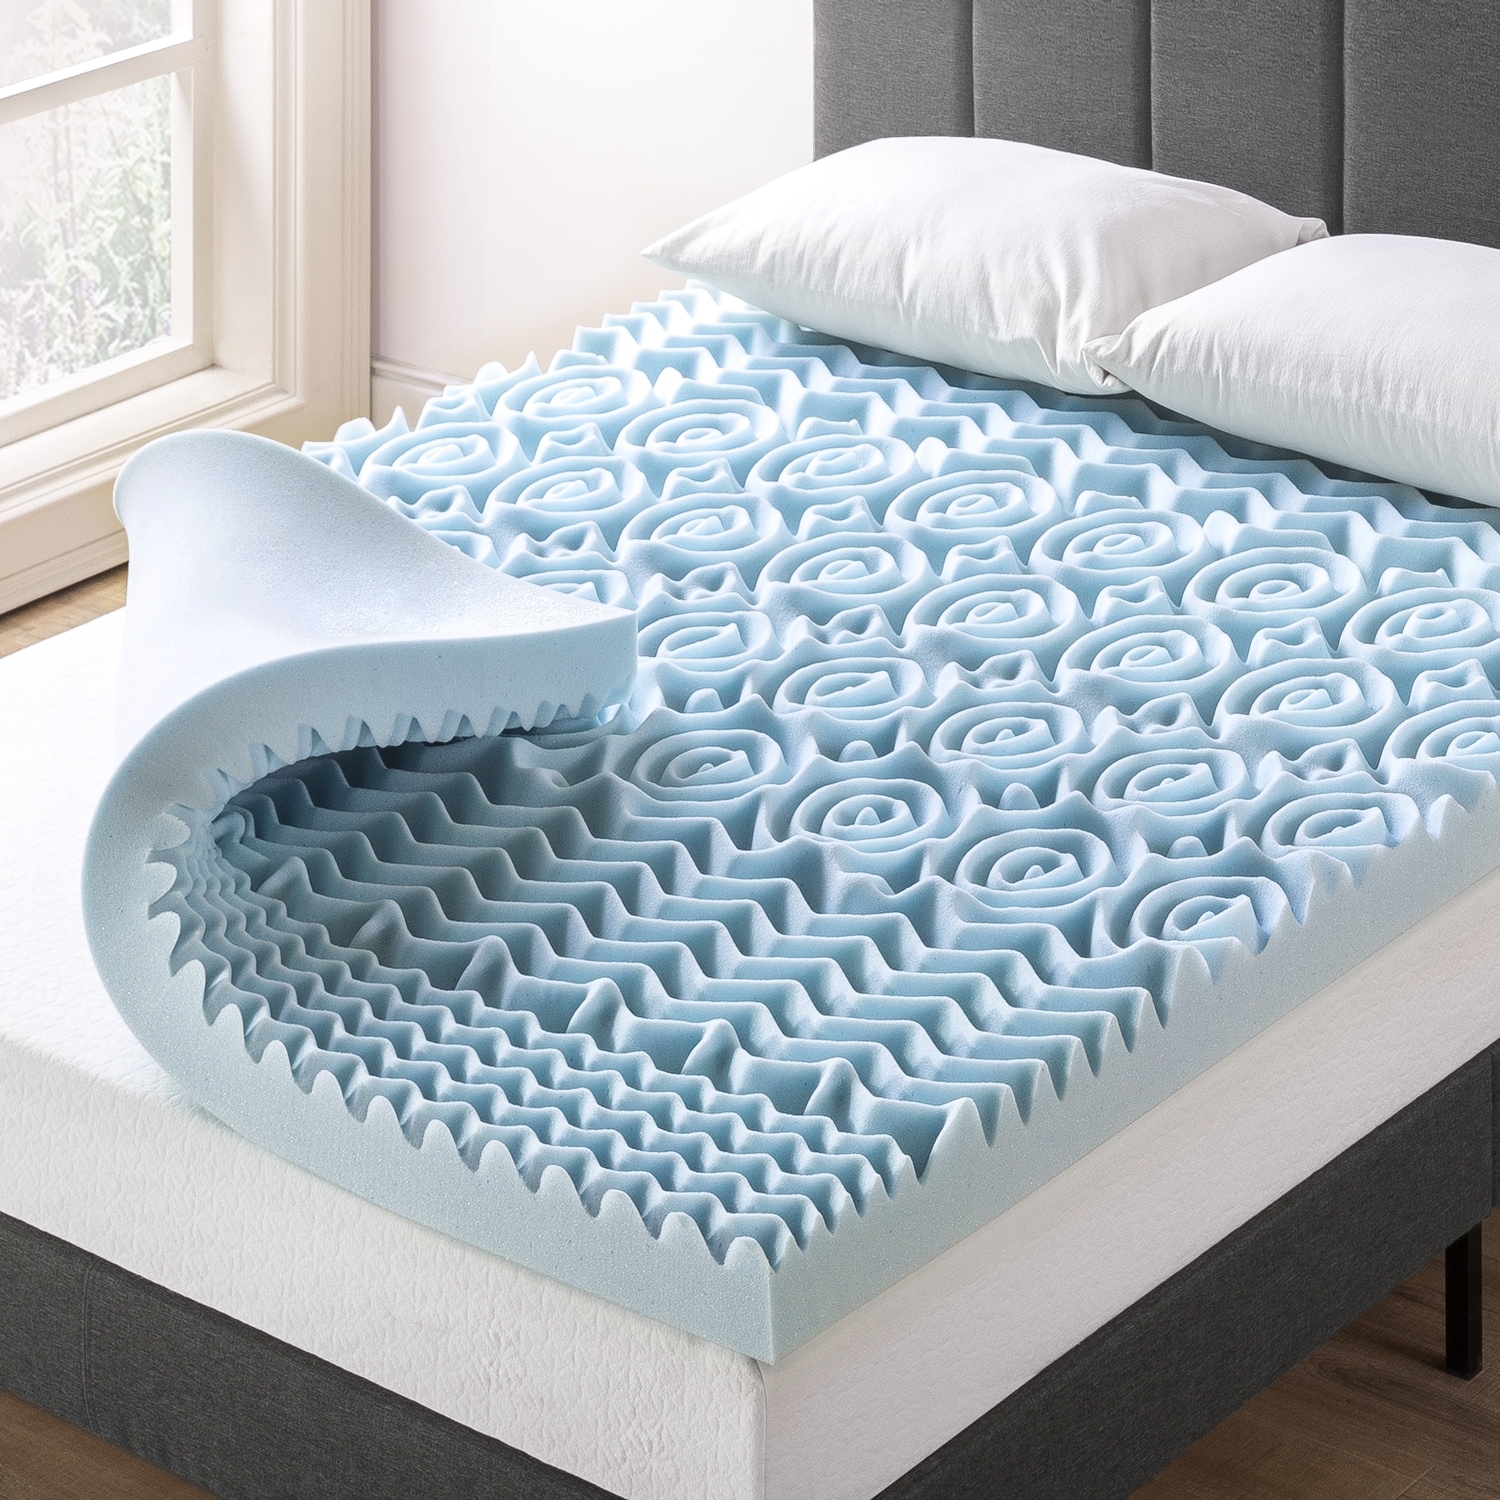 Details about   HOFISH 3 Inches Gel Infused Memory Foam Mattress Topper-Queen 